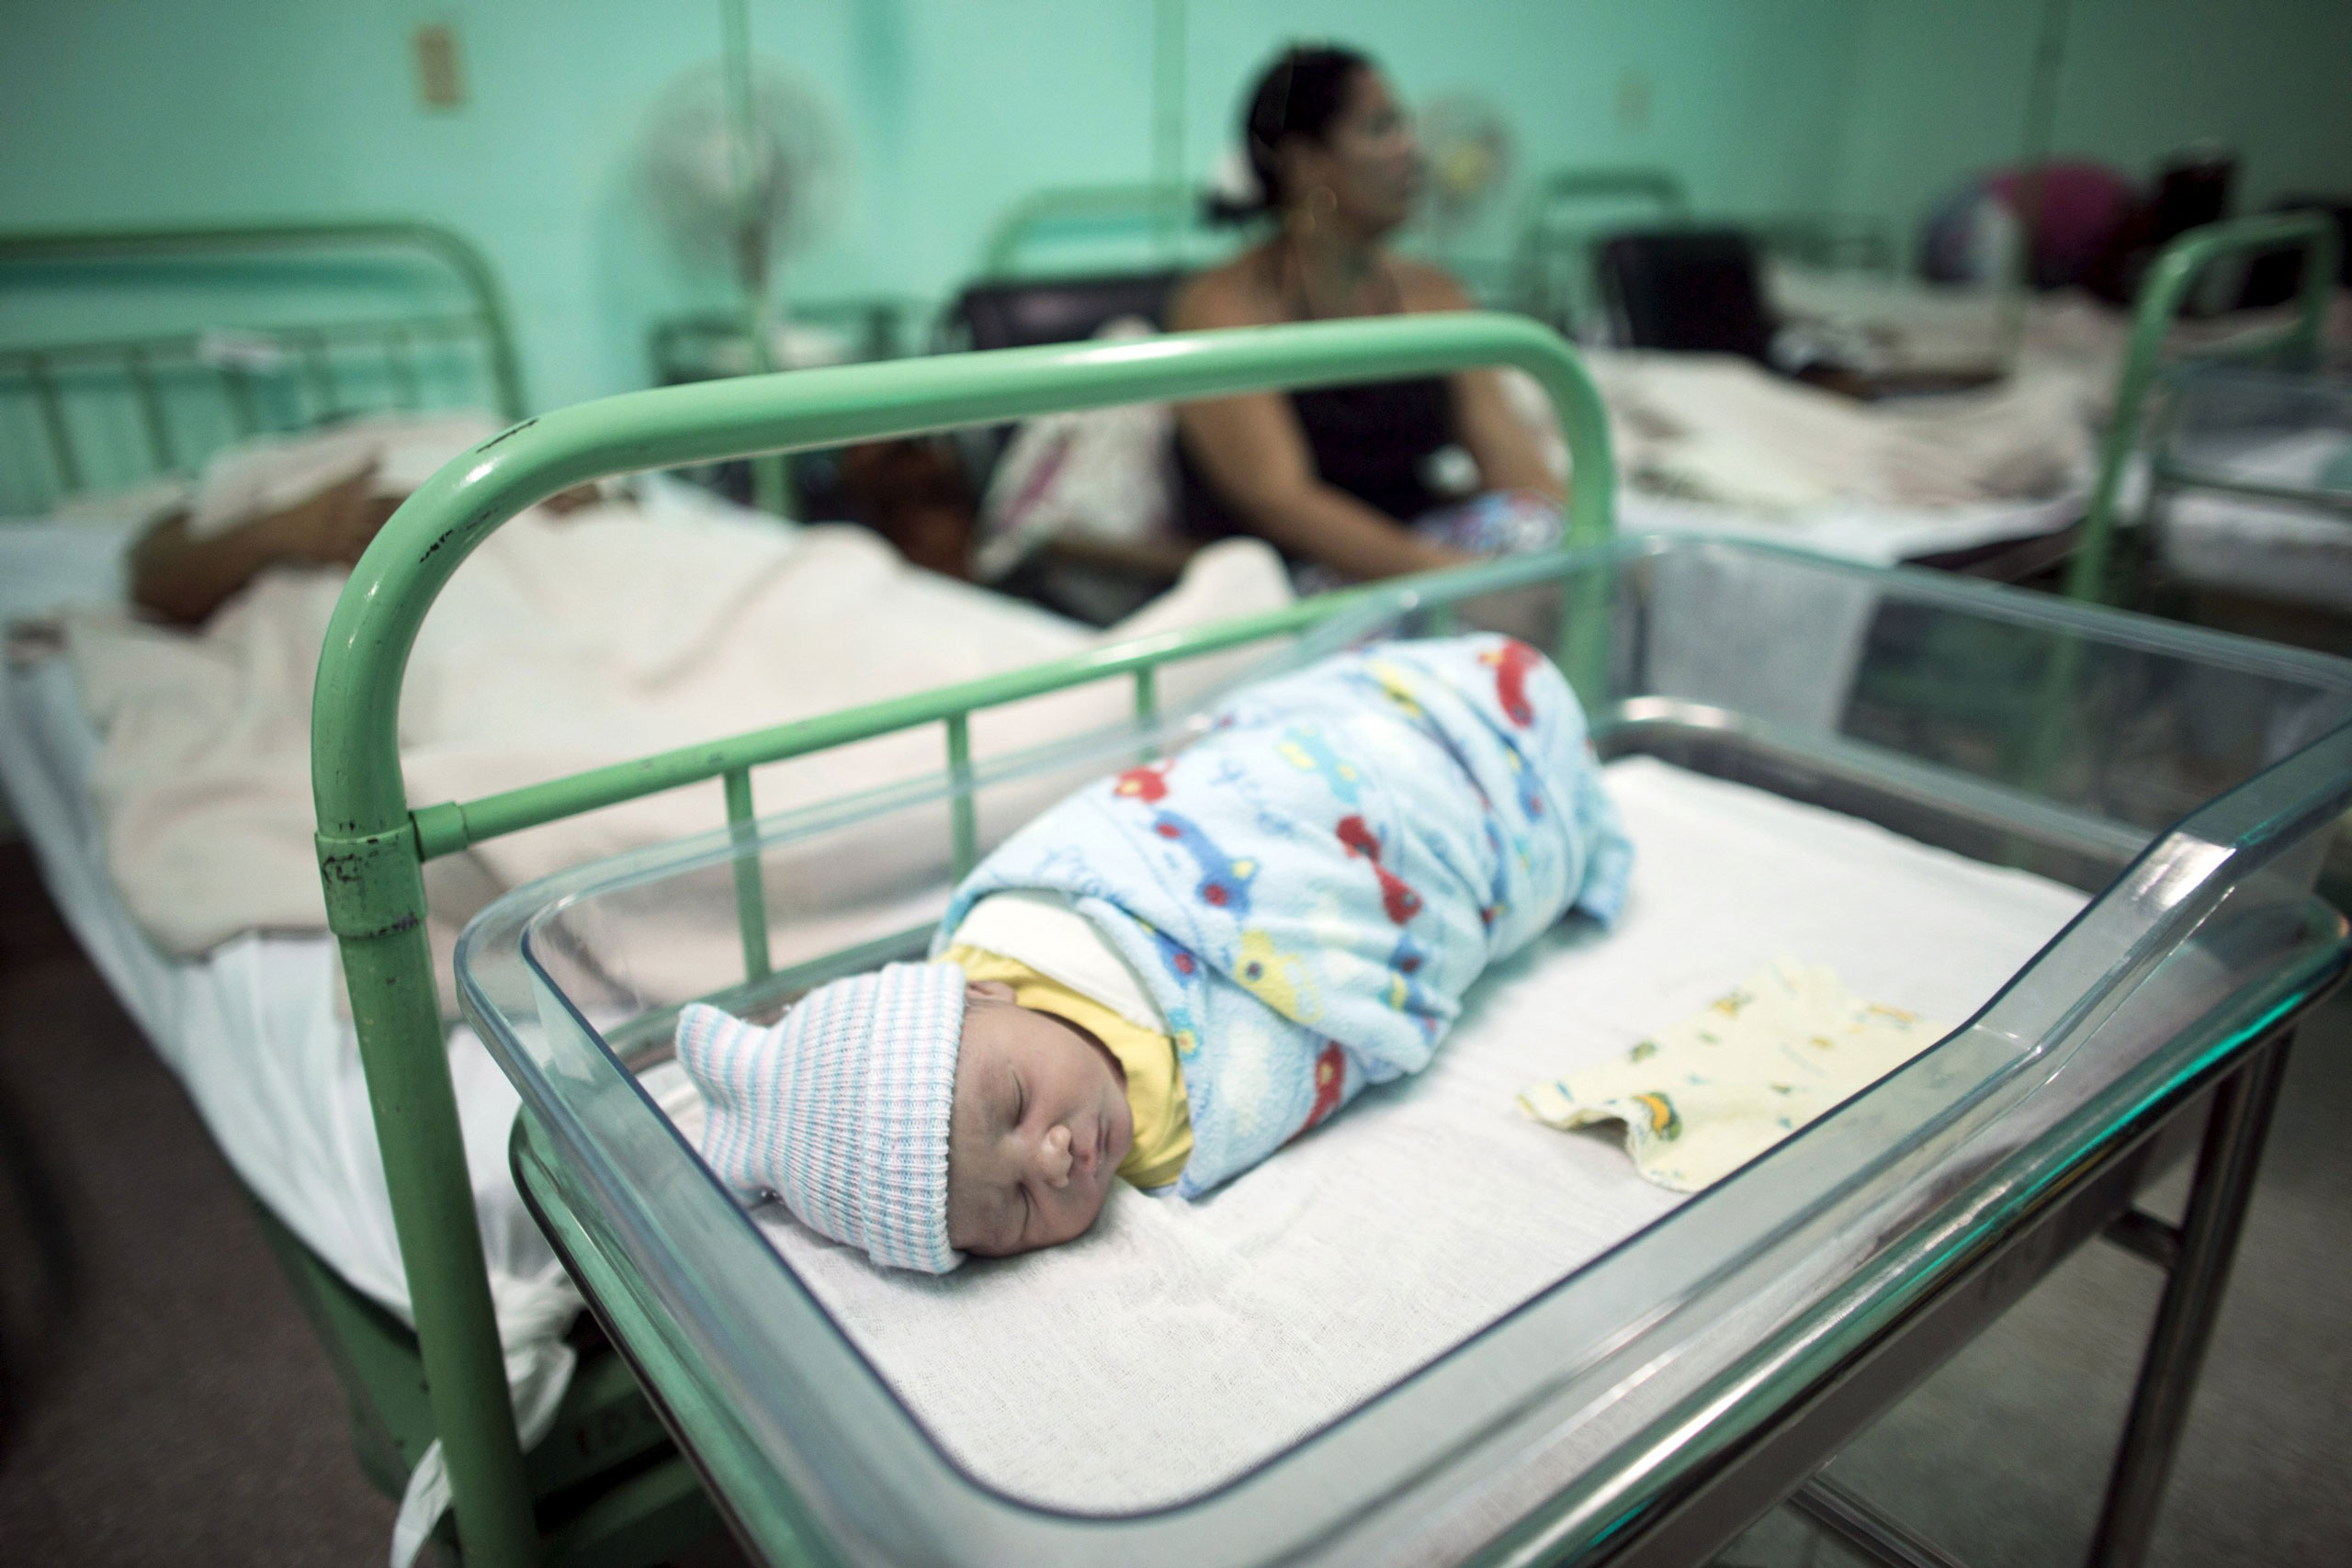 A new born baby rests beside his mother at the Ana Betancourt de Mora Hospital in Camaguey, Cuba, June 19, 2015. The World Health Organization on Tuesday declared Cuba the first country in the world to eliminate the transmission of HIV and syphilis from mother to child. Picture taken June 19, 2015. REUTERS/Alexandre Meneghini